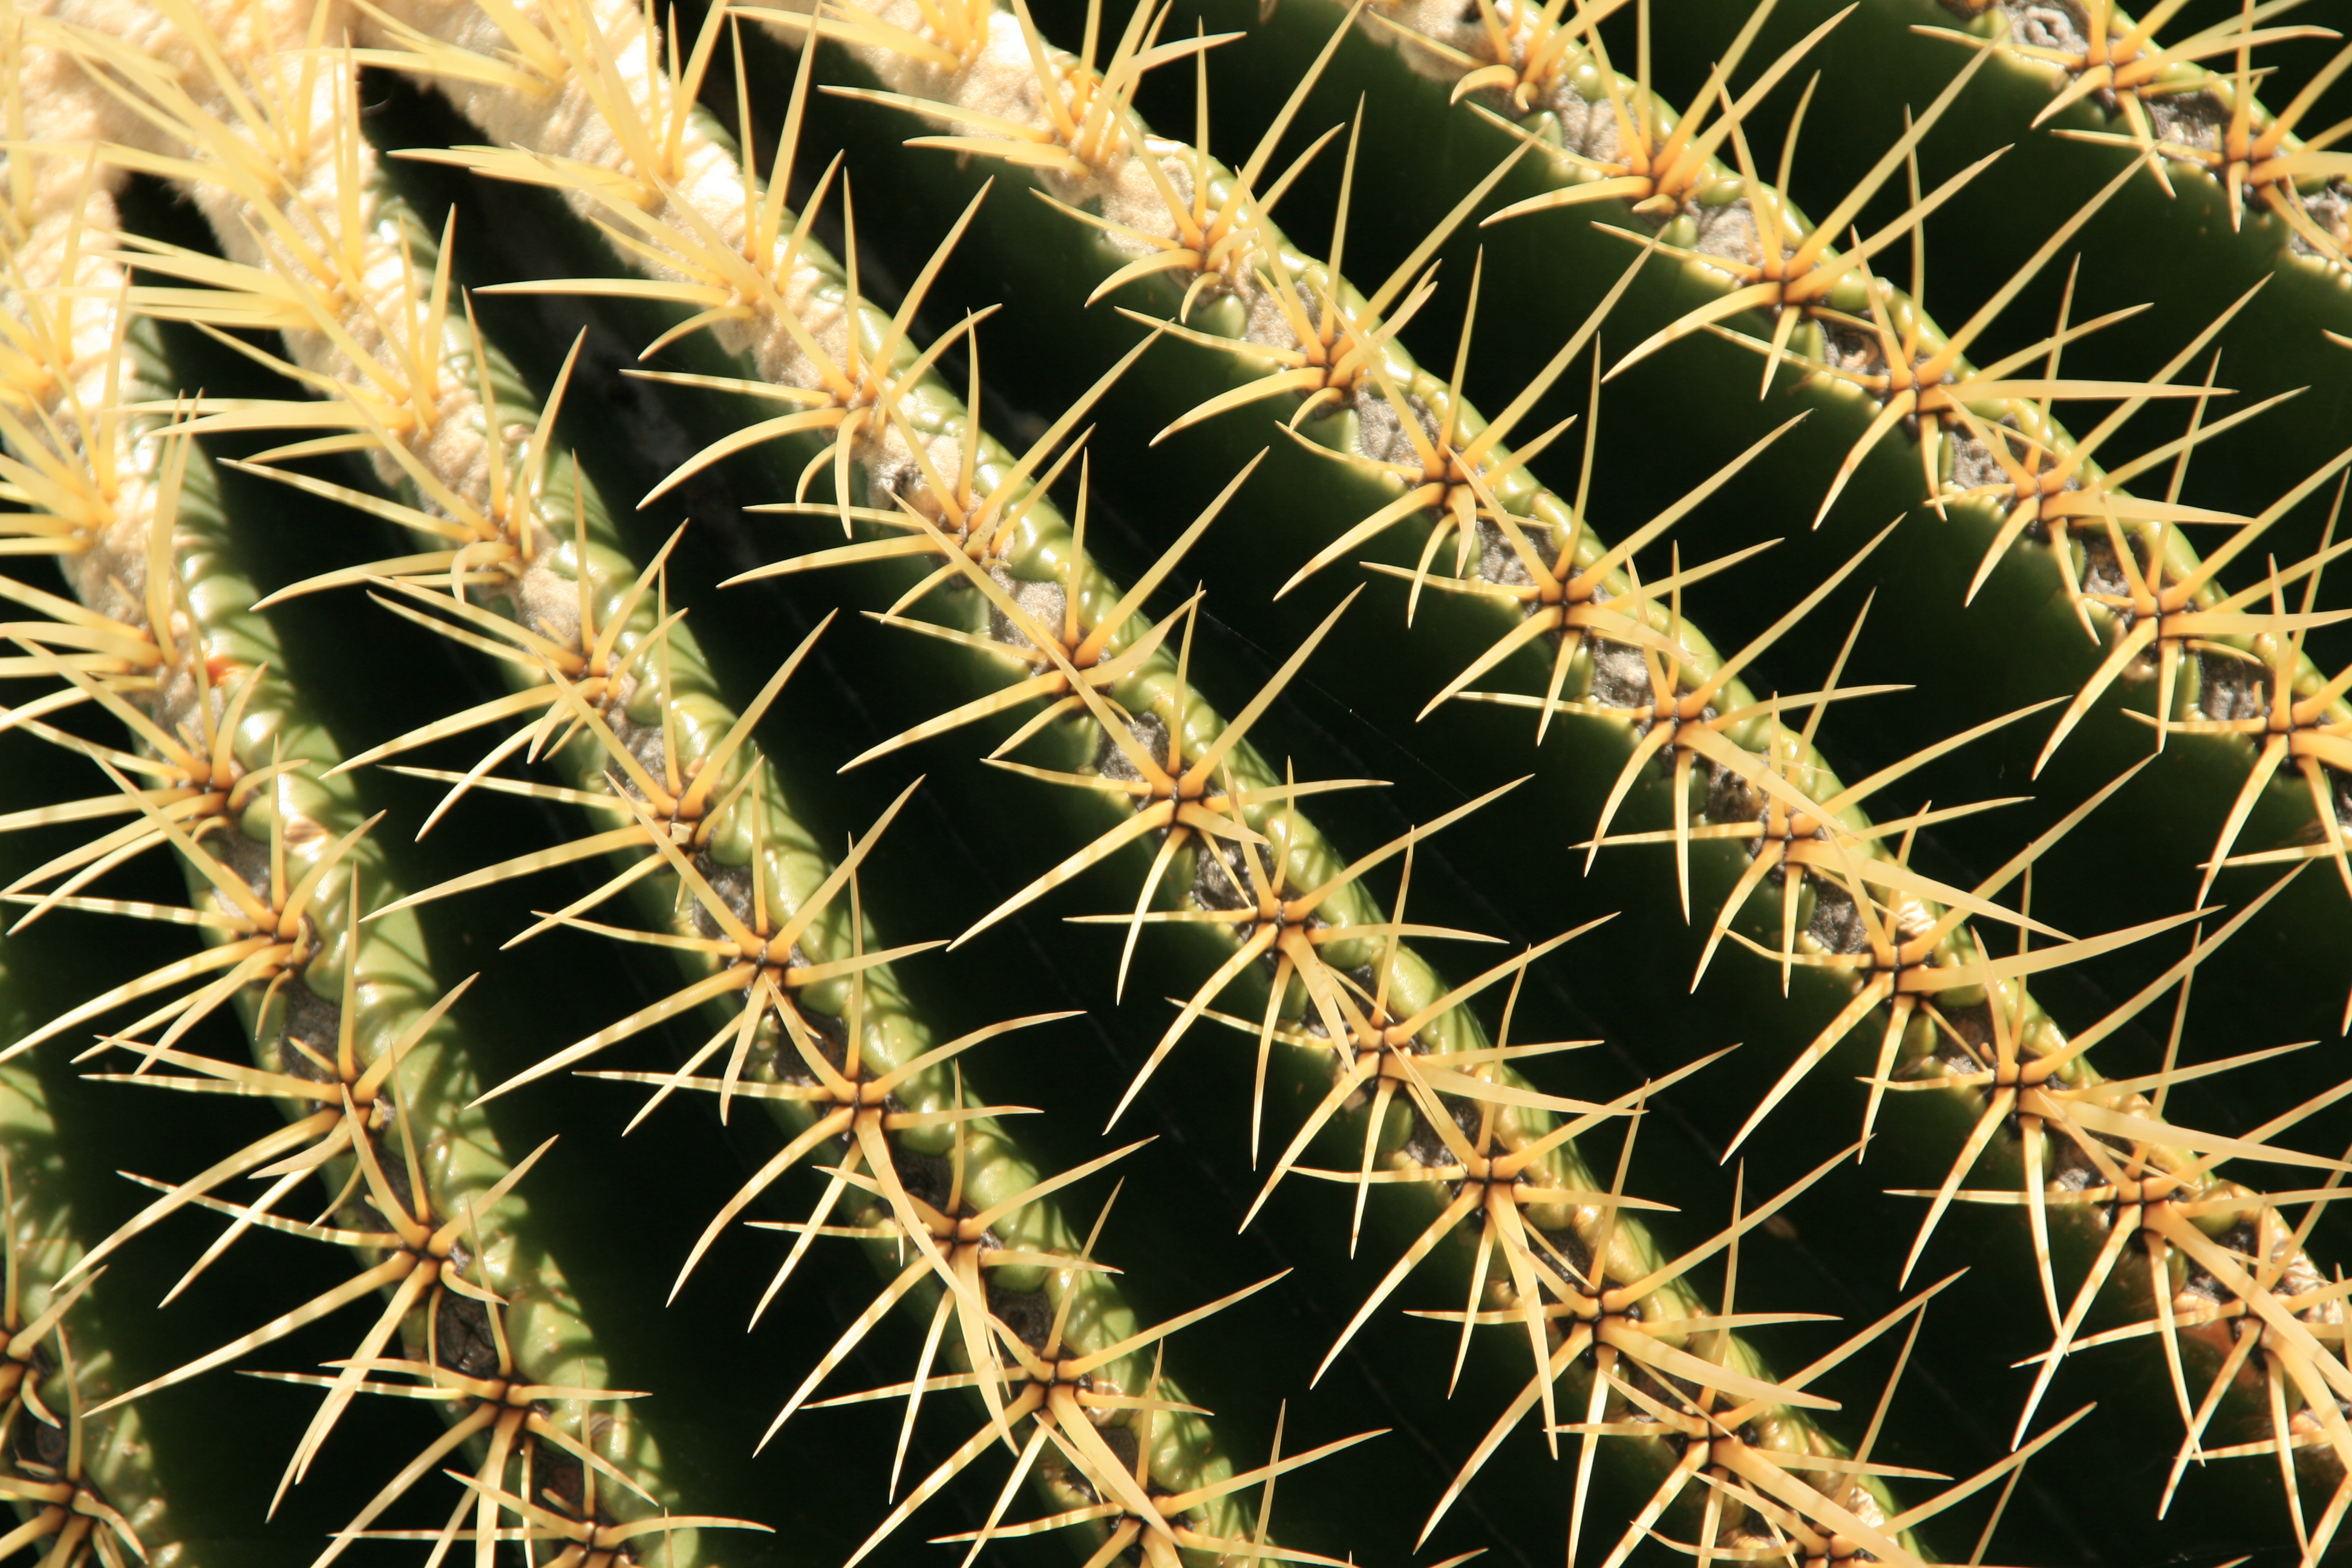 File:Cactus close-up, but dont get too close, ouch! (3225490111).jpg ...